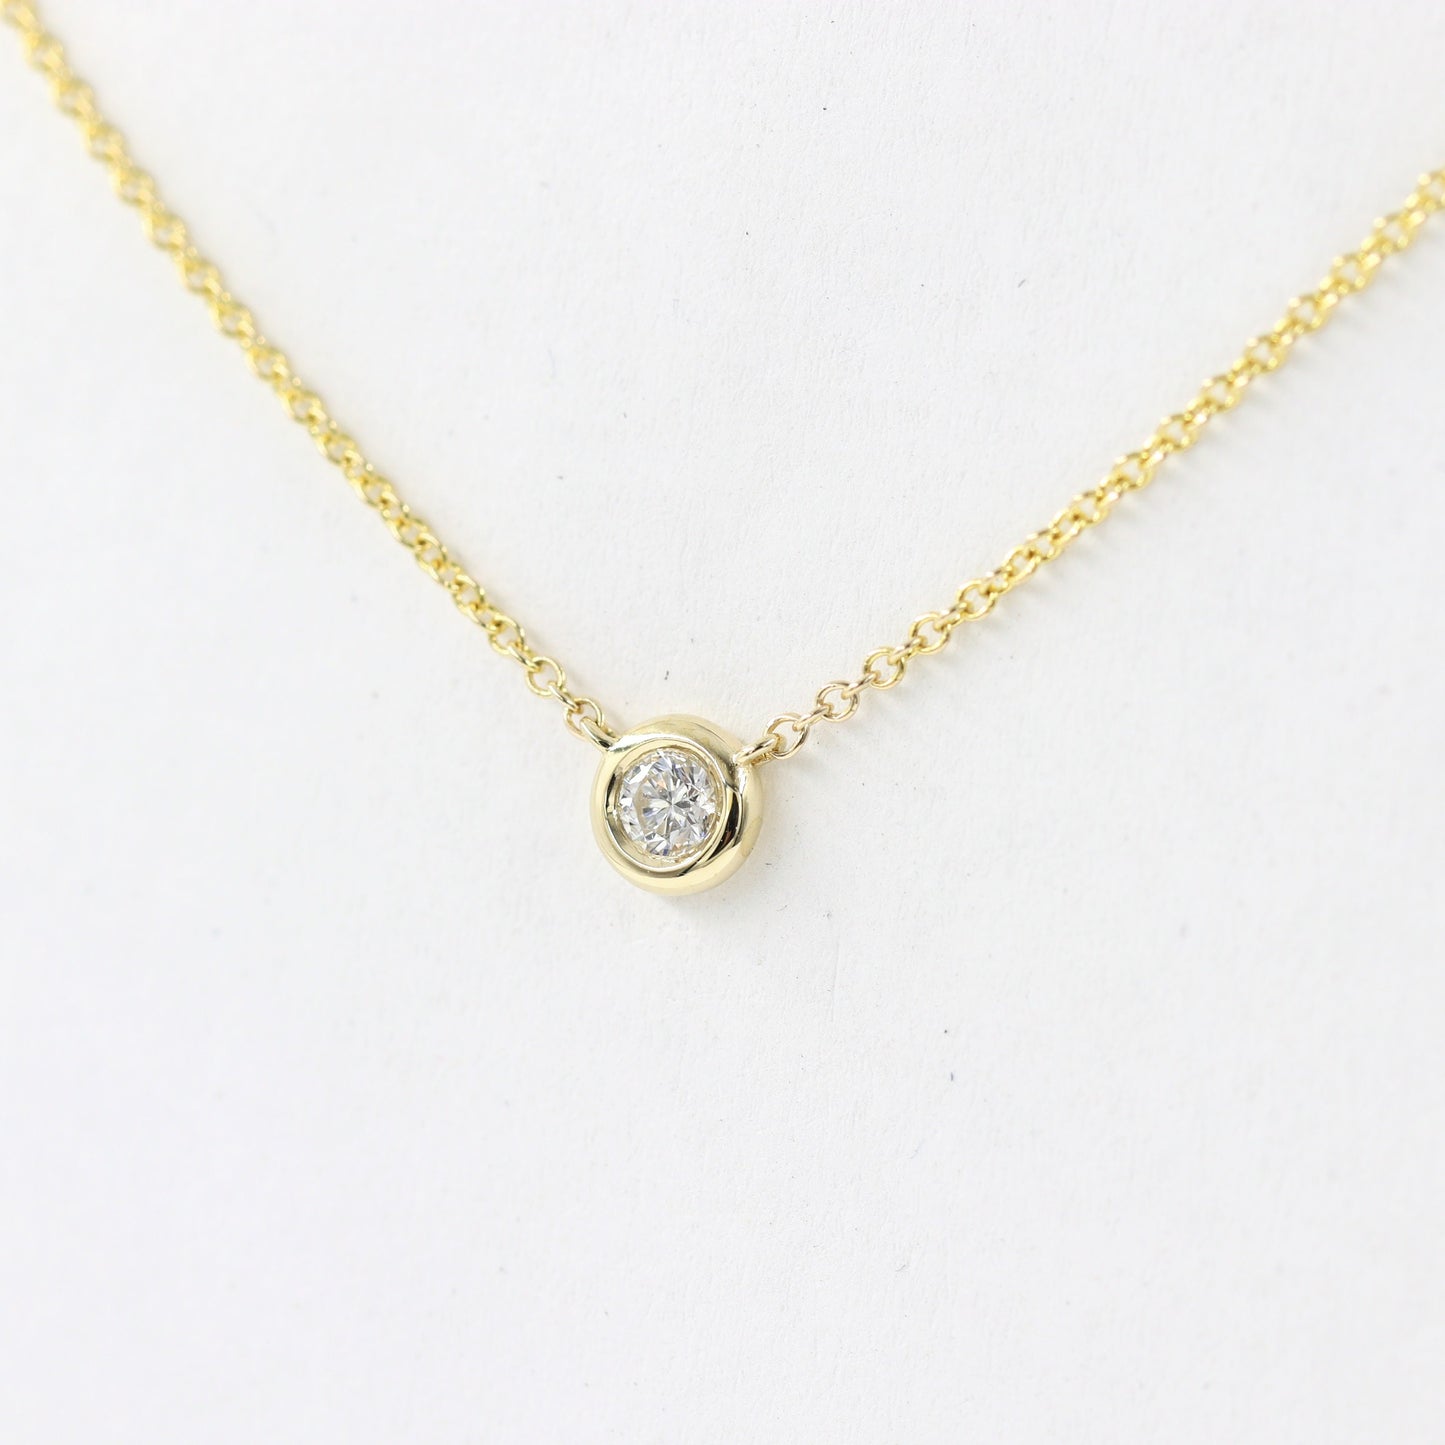 Diamond .03~.07ct Solitaire Necklace/Natural  Diamond Necklace/Minimalist Necklace/Solitaire Diamond Necklace/ Bezel Necklace/Gift for her